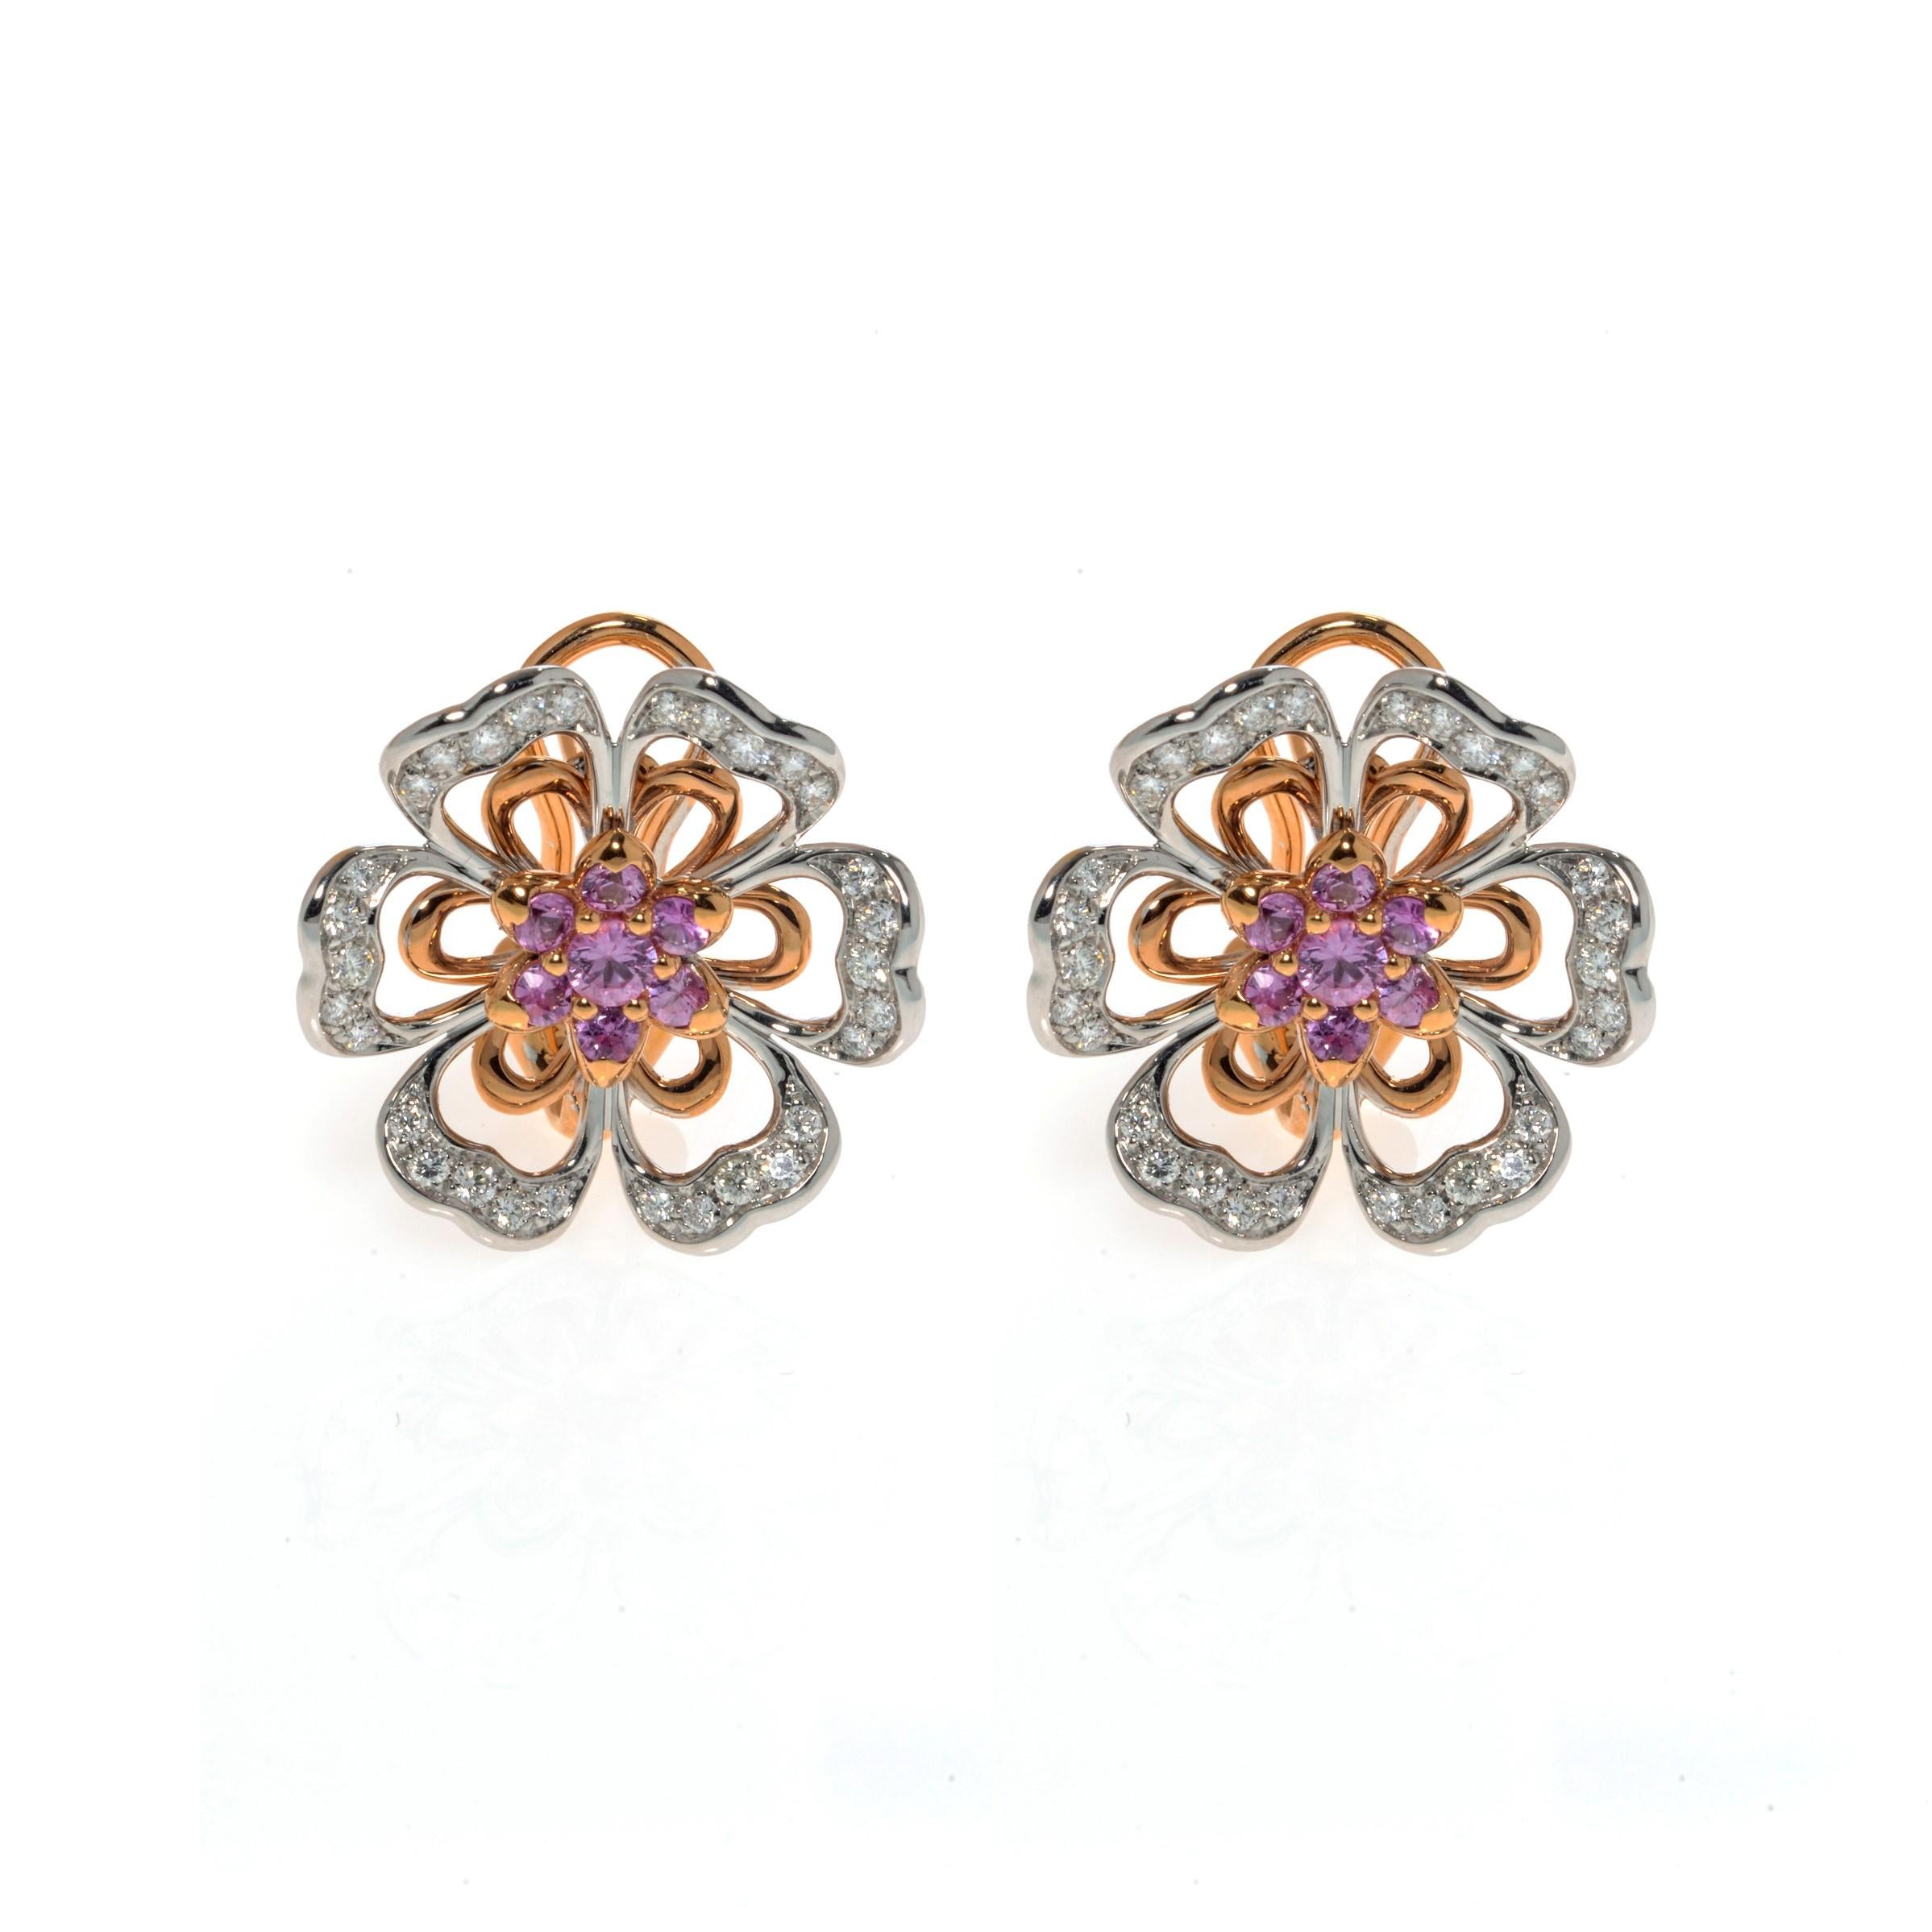 This gorgeous pair of estate earrings is finely crafted in solid 18K rose and white gold, made in the shape of beautiful flowers. Set with pink natural Sapphires and brilliant cut diamonds. The total diamond weight for the pair is 0.70 carats of